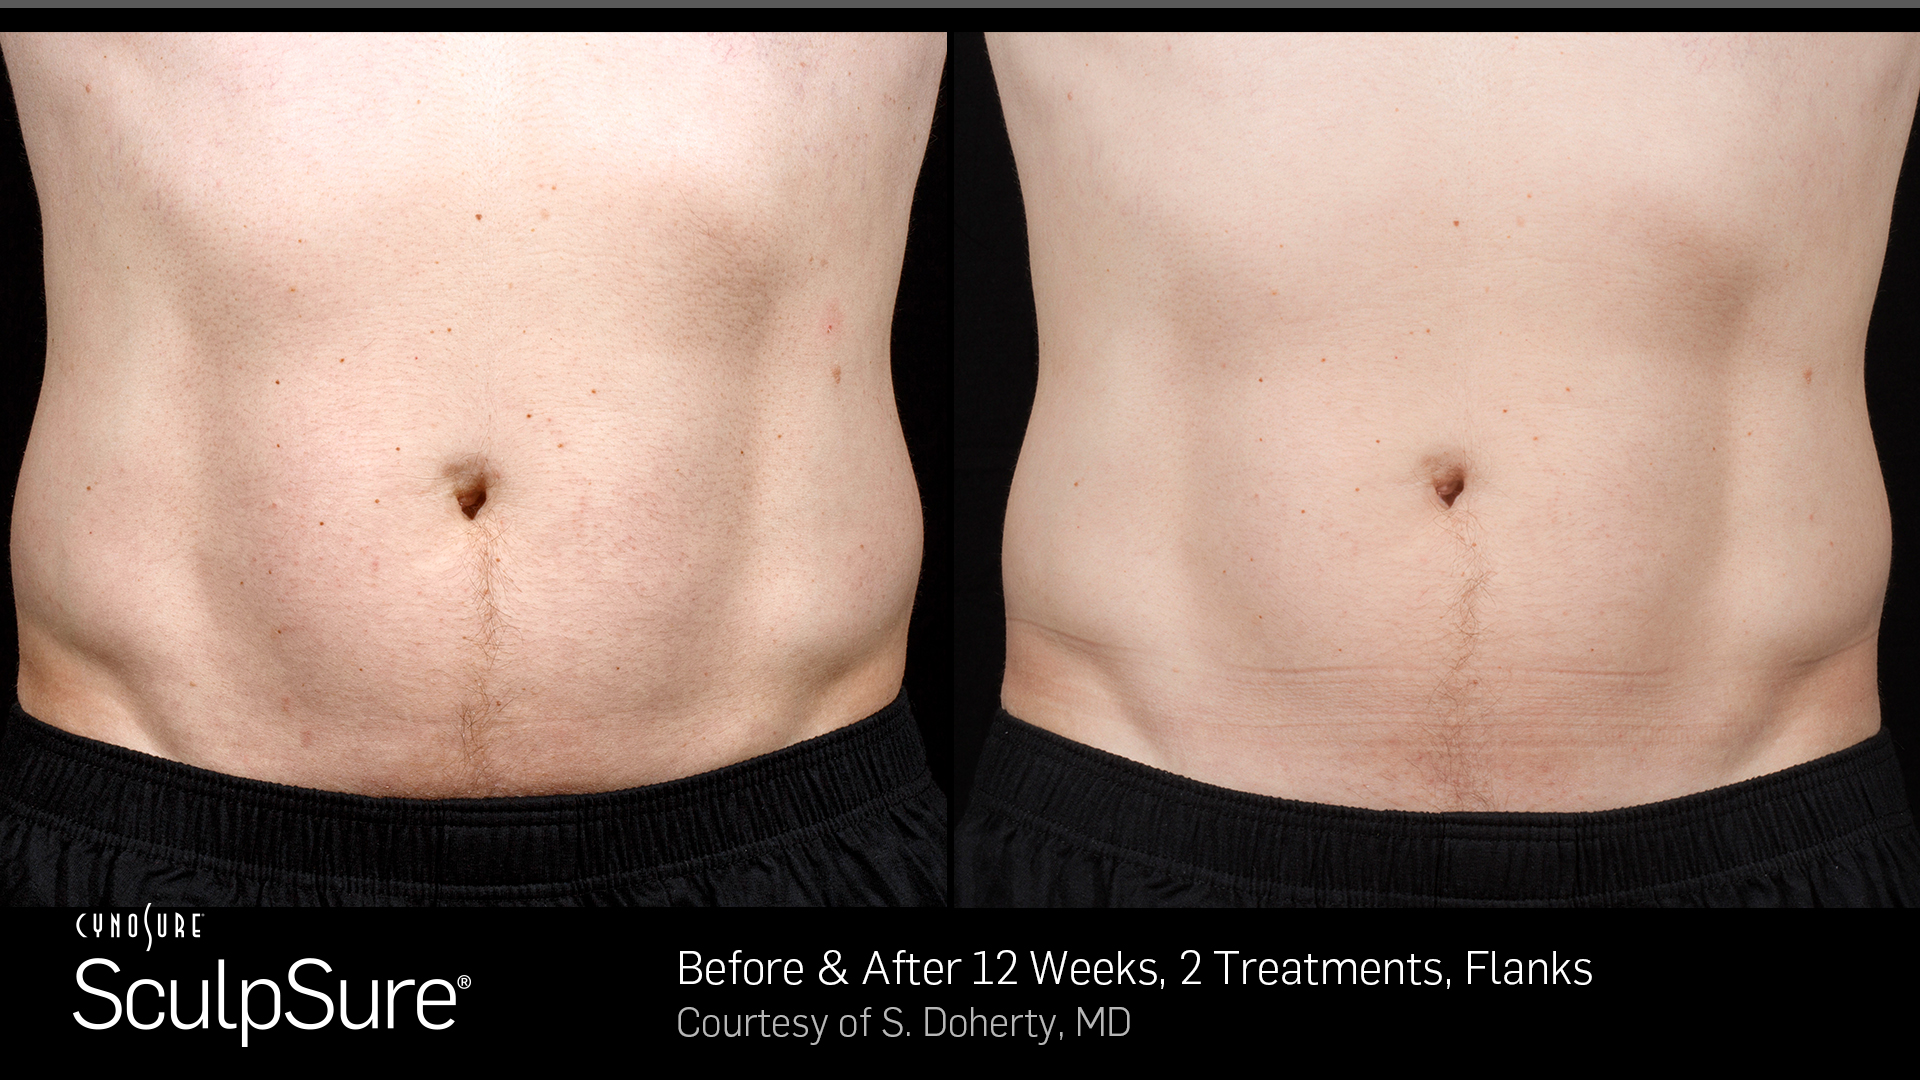 Before and After Sculpsure